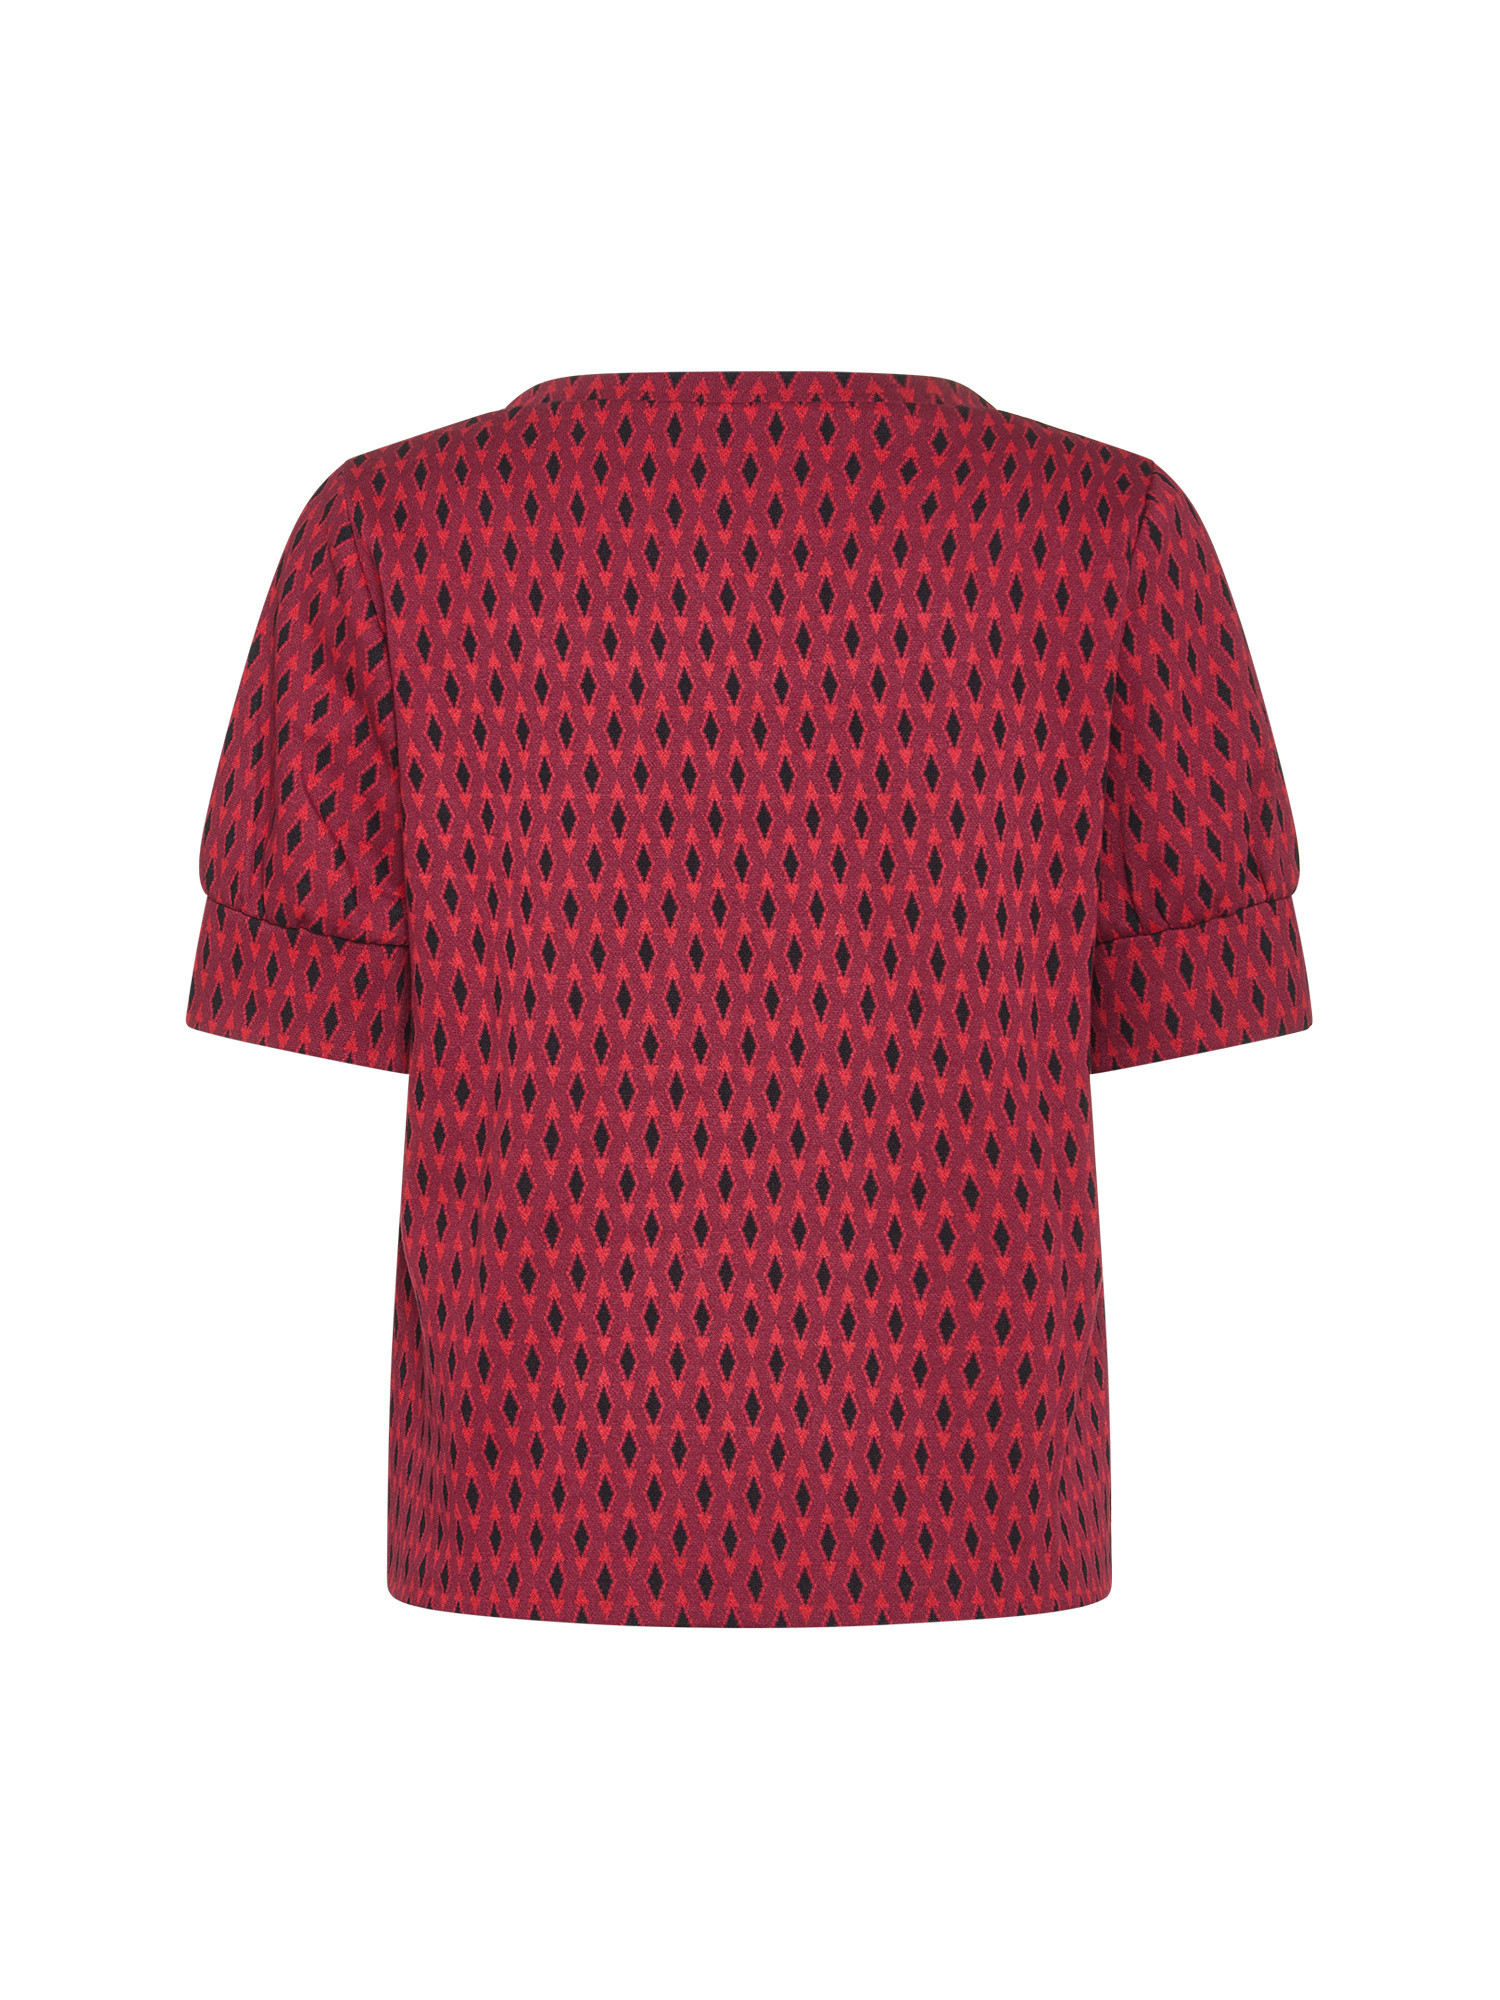 Koan - T-shirt with diamond pattern, Red, large image number 1